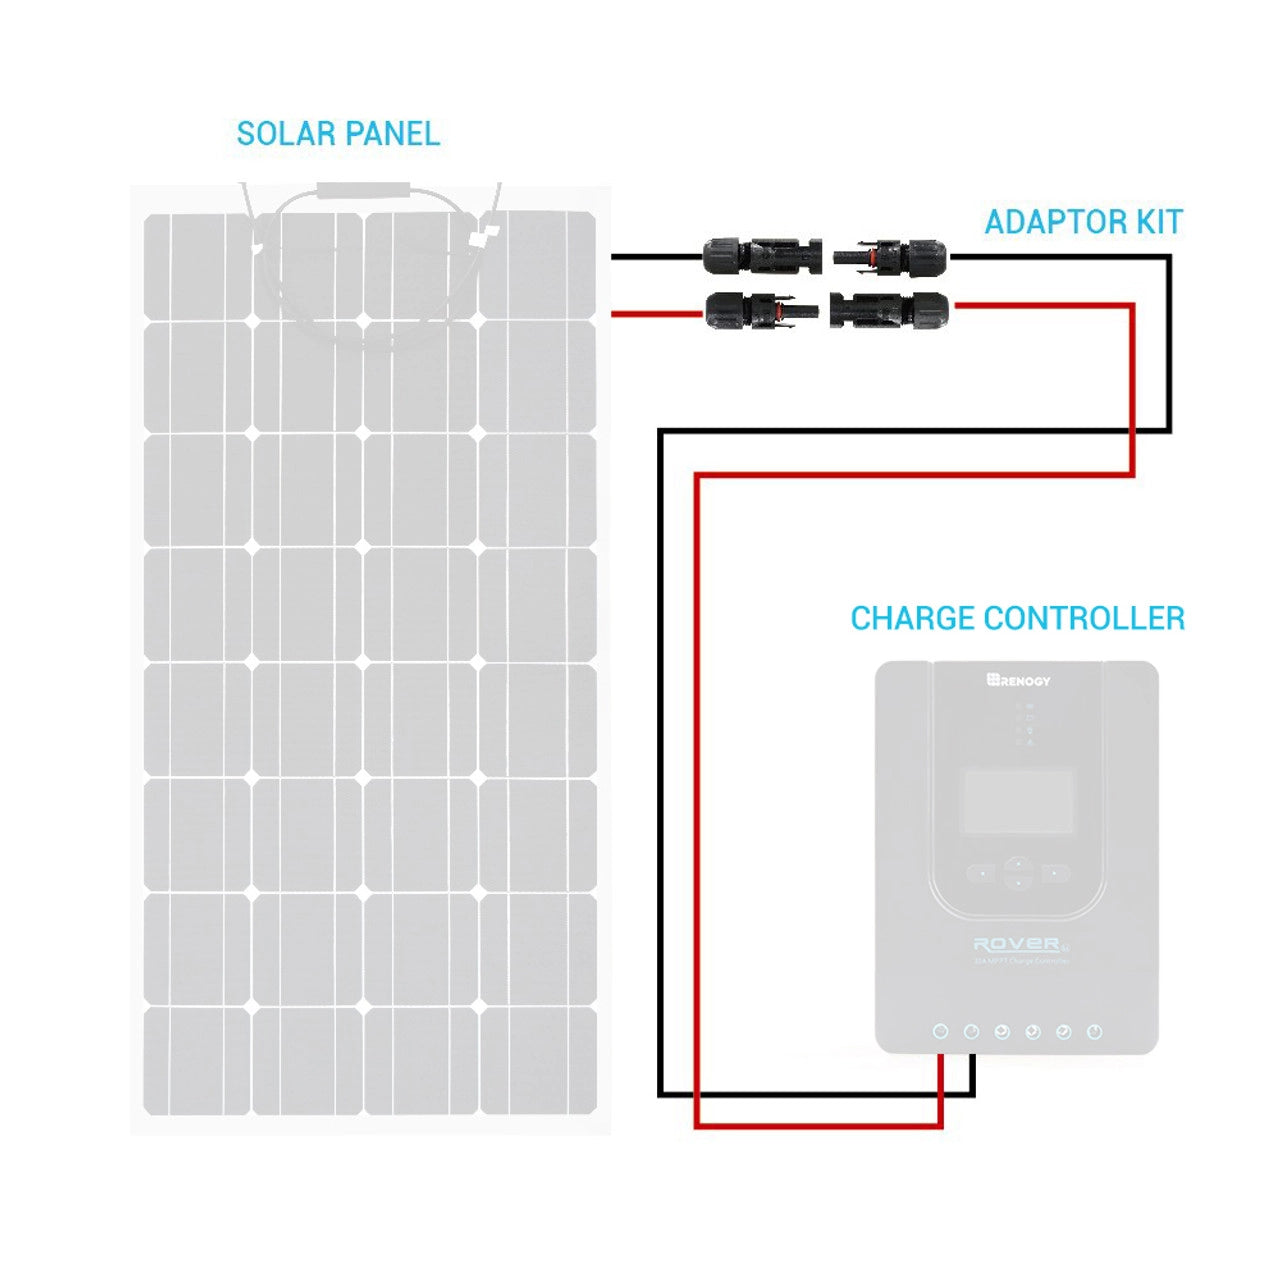 Solar Panel to Charge Controller Adaptor Kit Charge Controller Solar Panel